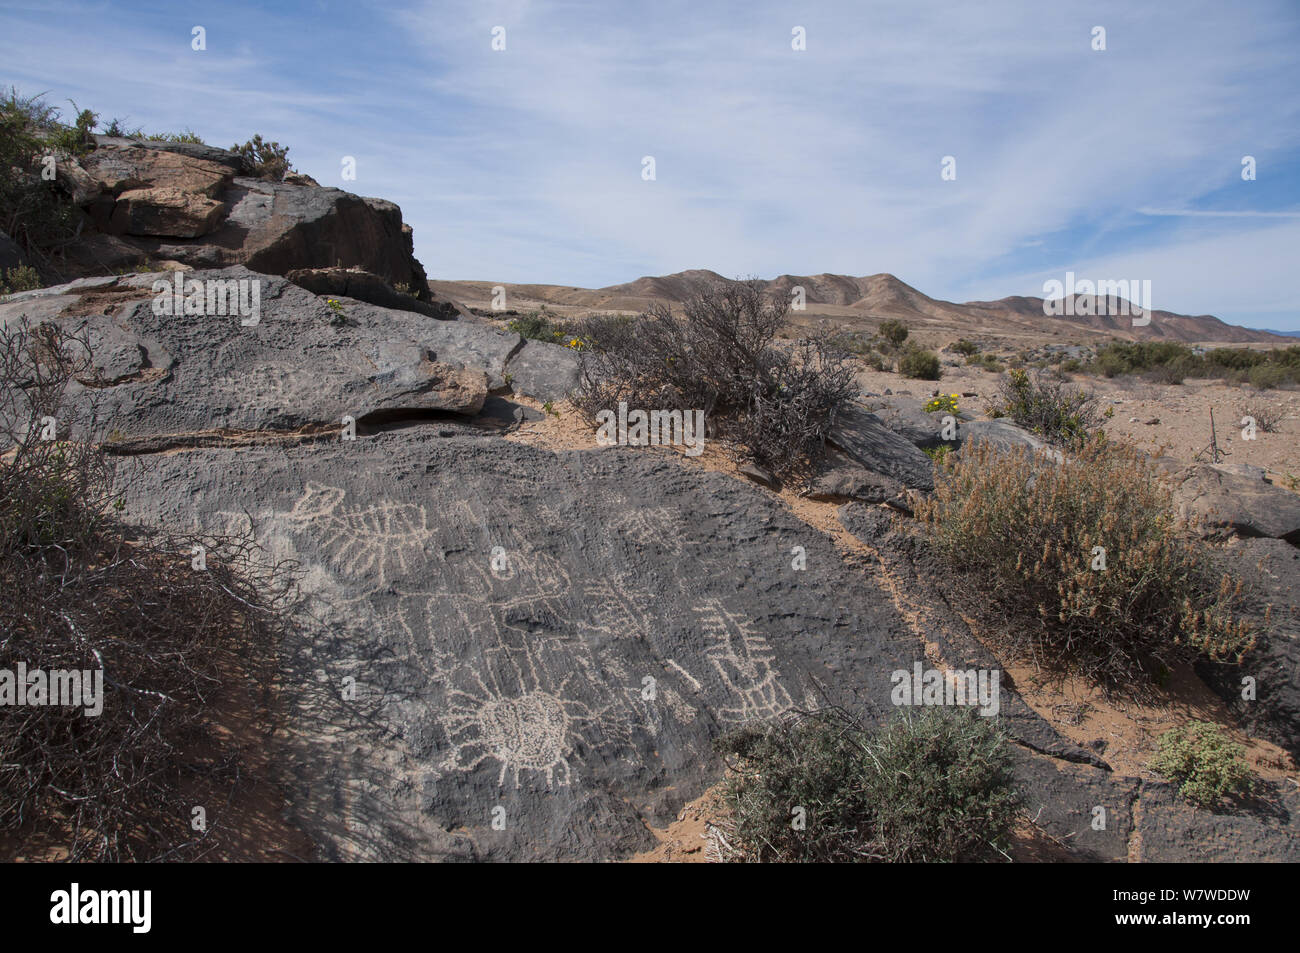 Petroglyphs on black dolomite rock, Richterveld National Park and World Heritage Site, Northern Cape, South Africa, August 2011. Stock Photo